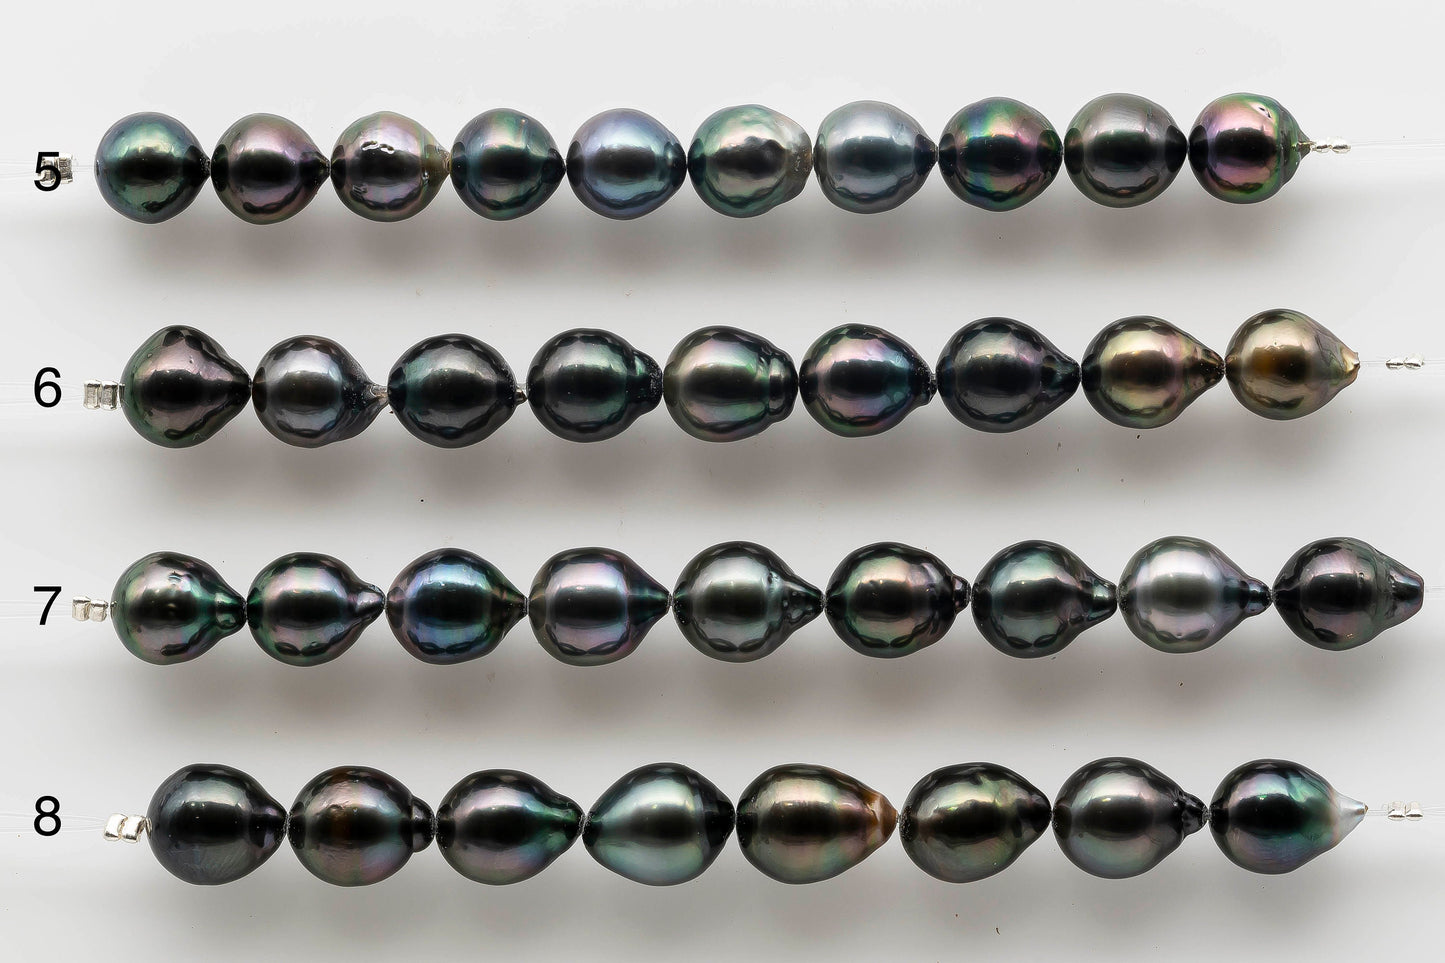 9-10mm Gorgeous Tahitian Pearl Near Round with High Luster and Natural Color for Jewelry Making, SKU # 1542TH